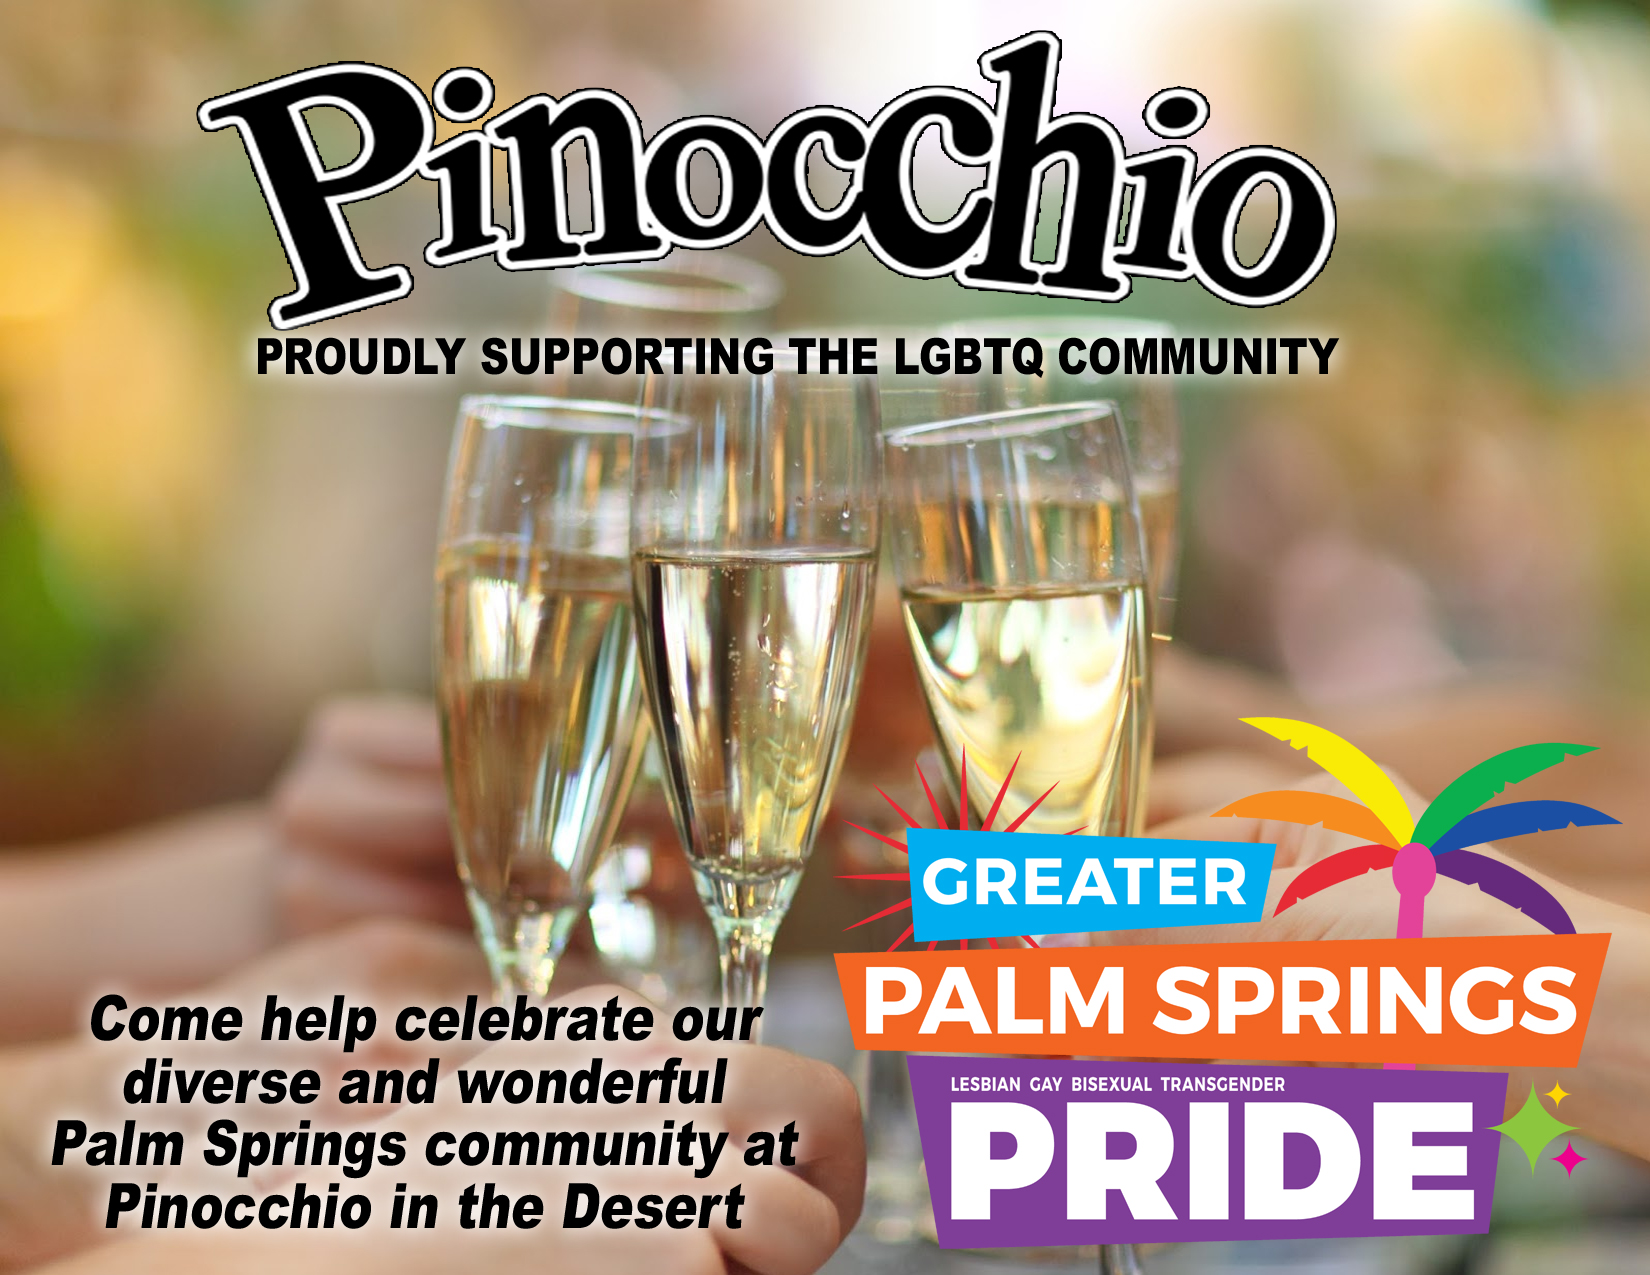 Pinocchio's proudly supporting the LGBTQ Community